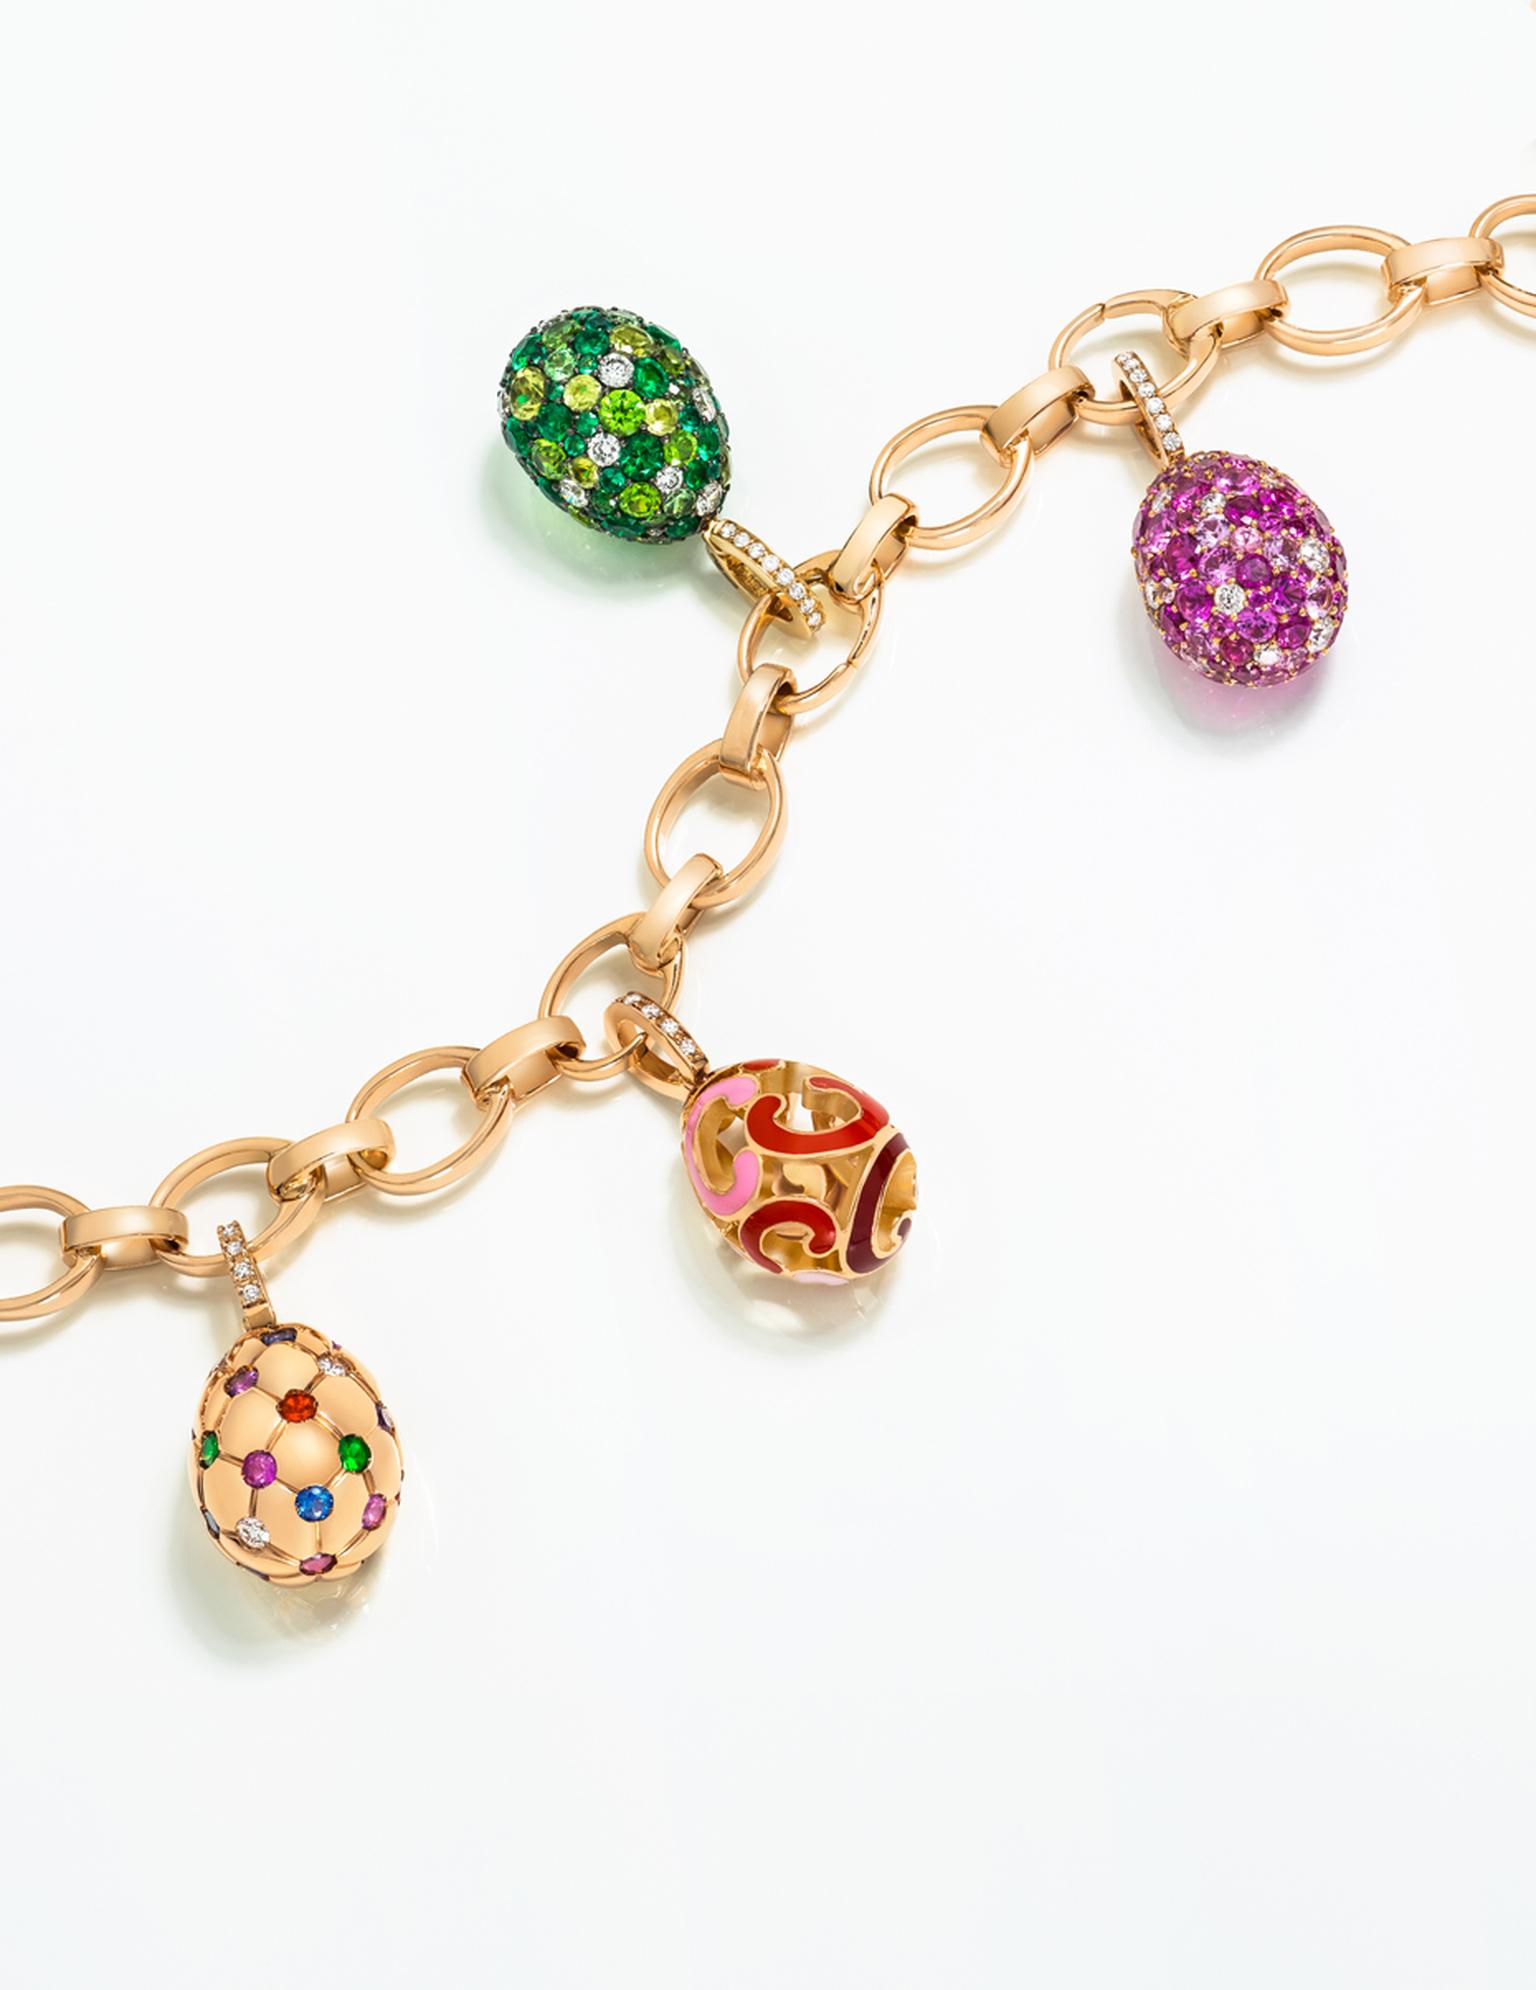 Fabergé's Egg Charms reference moments in Fabergé's history, including the Treillage egg, left, with its quilted pattern of gold dimpled with precious gemstones, which is a miniature interpretation of the 1892 Imperial Easter Egg.